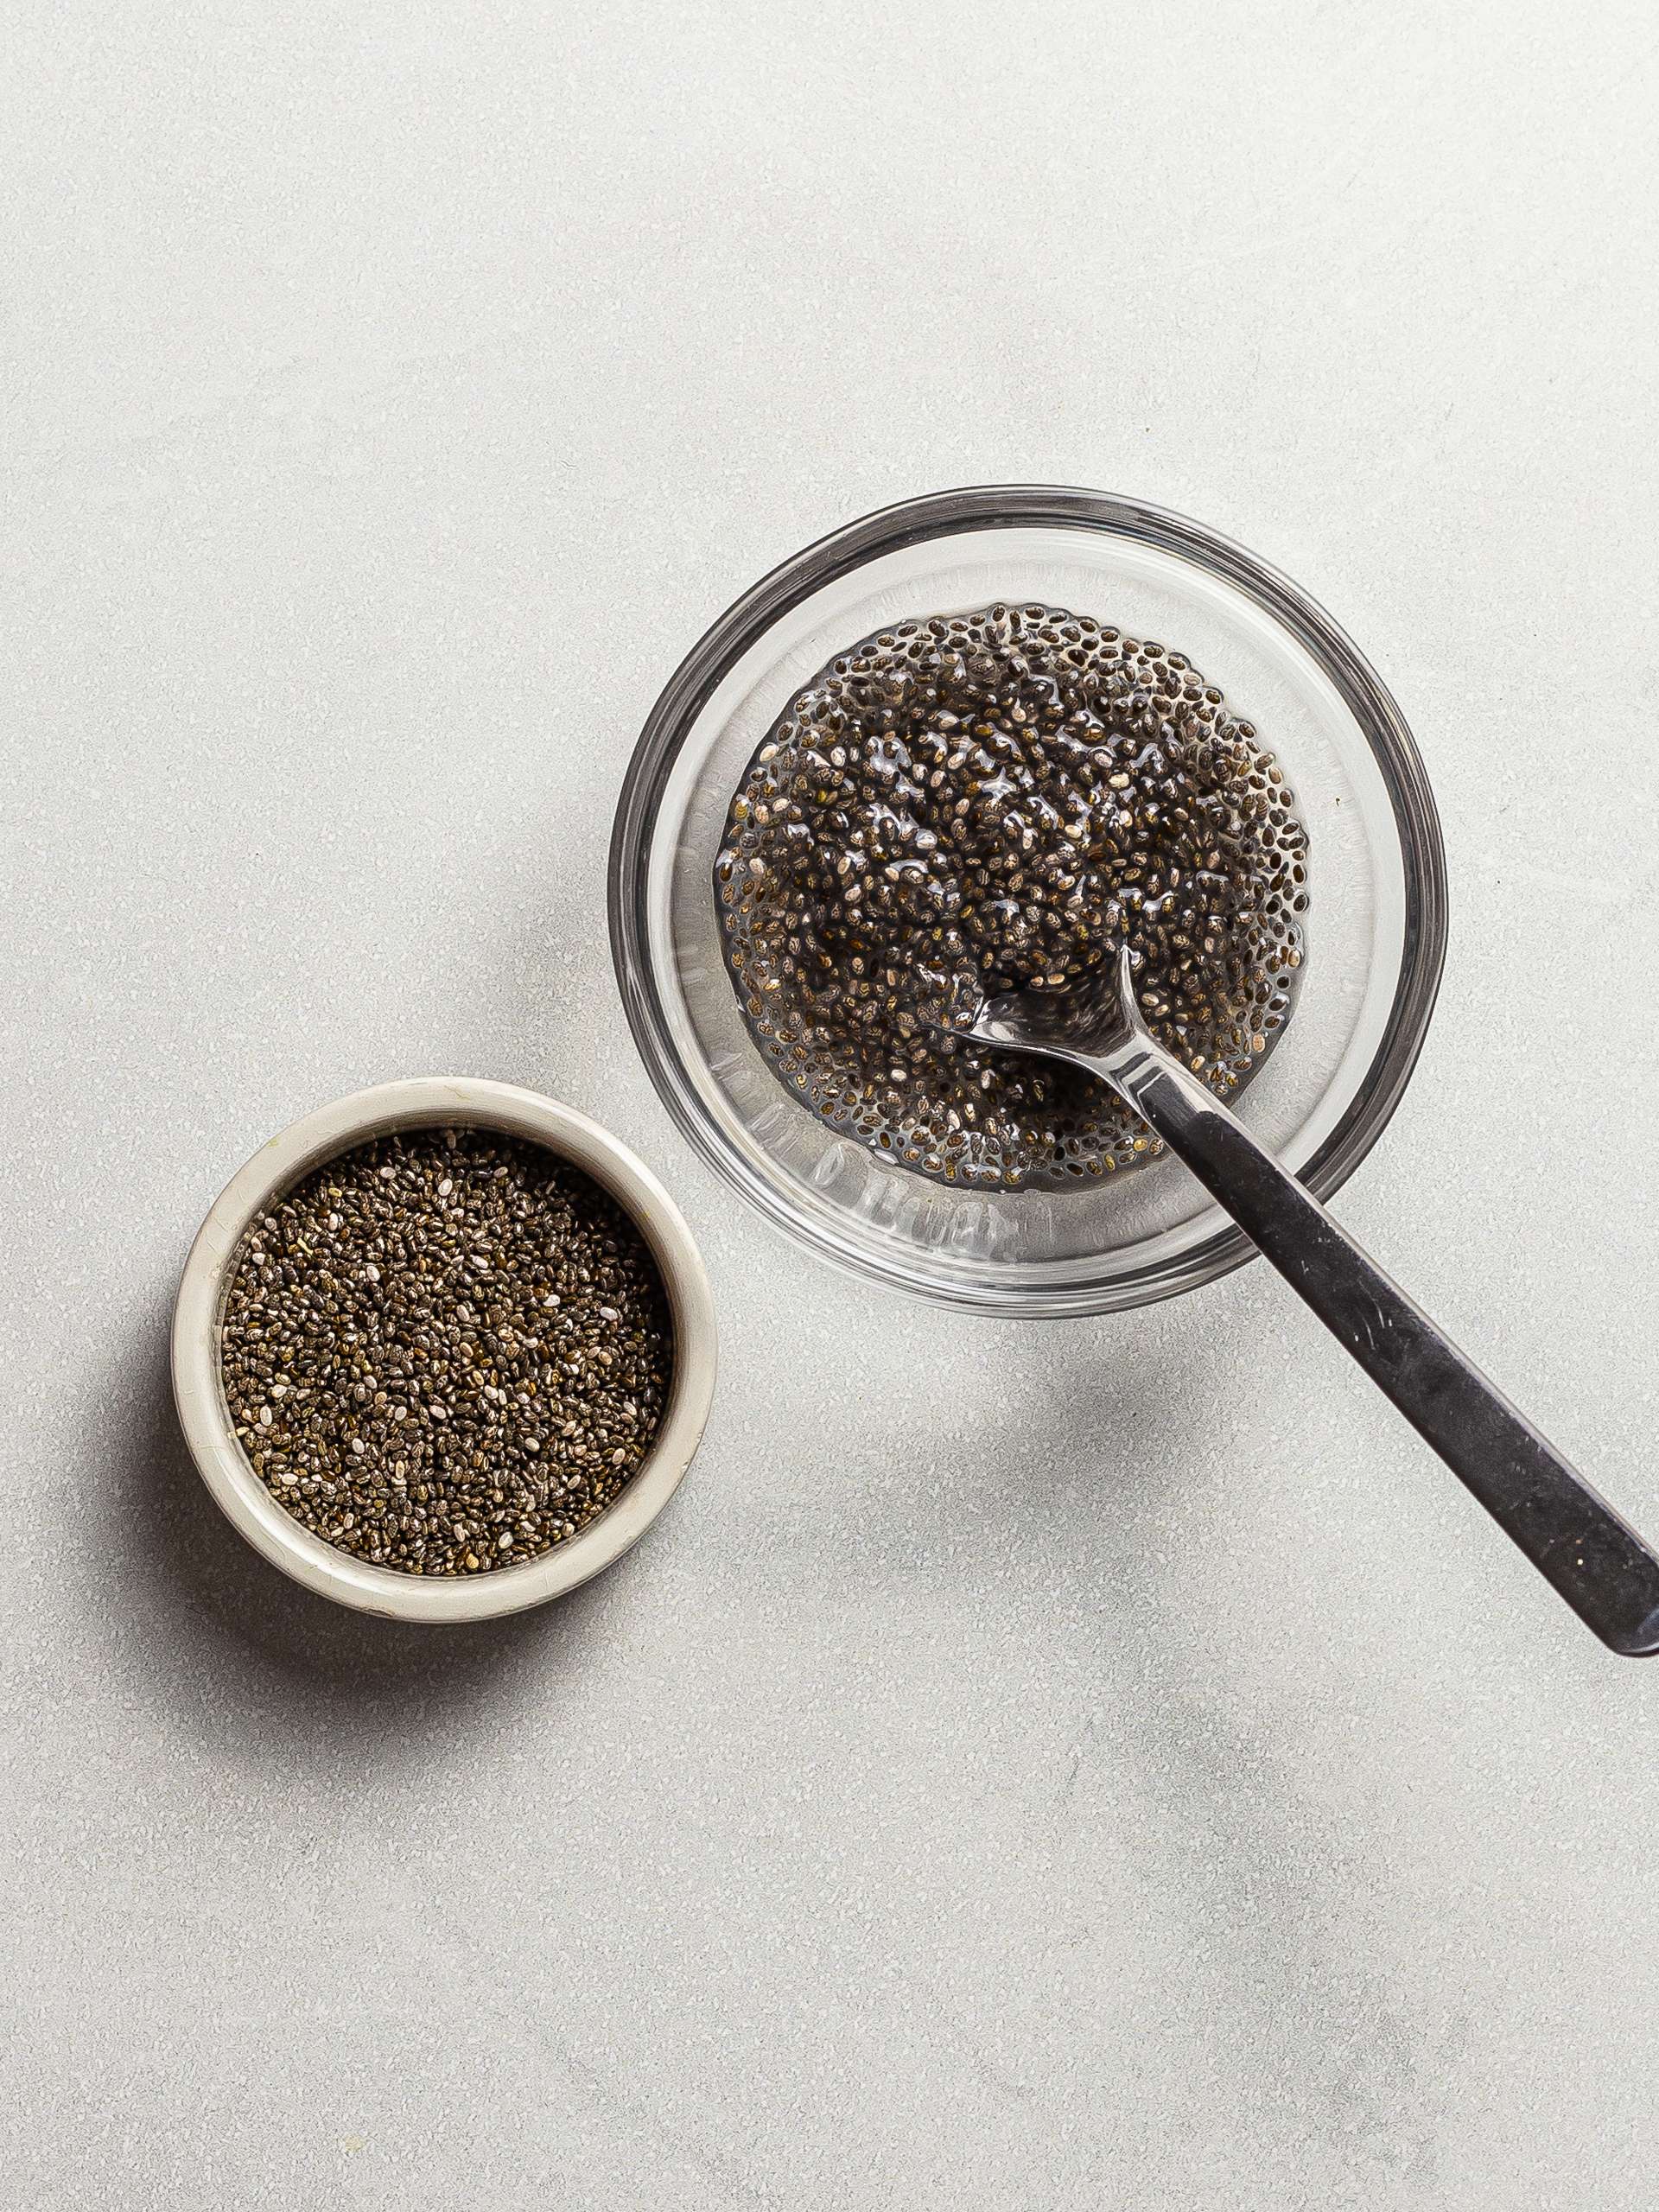 Soaked chia seeds in water